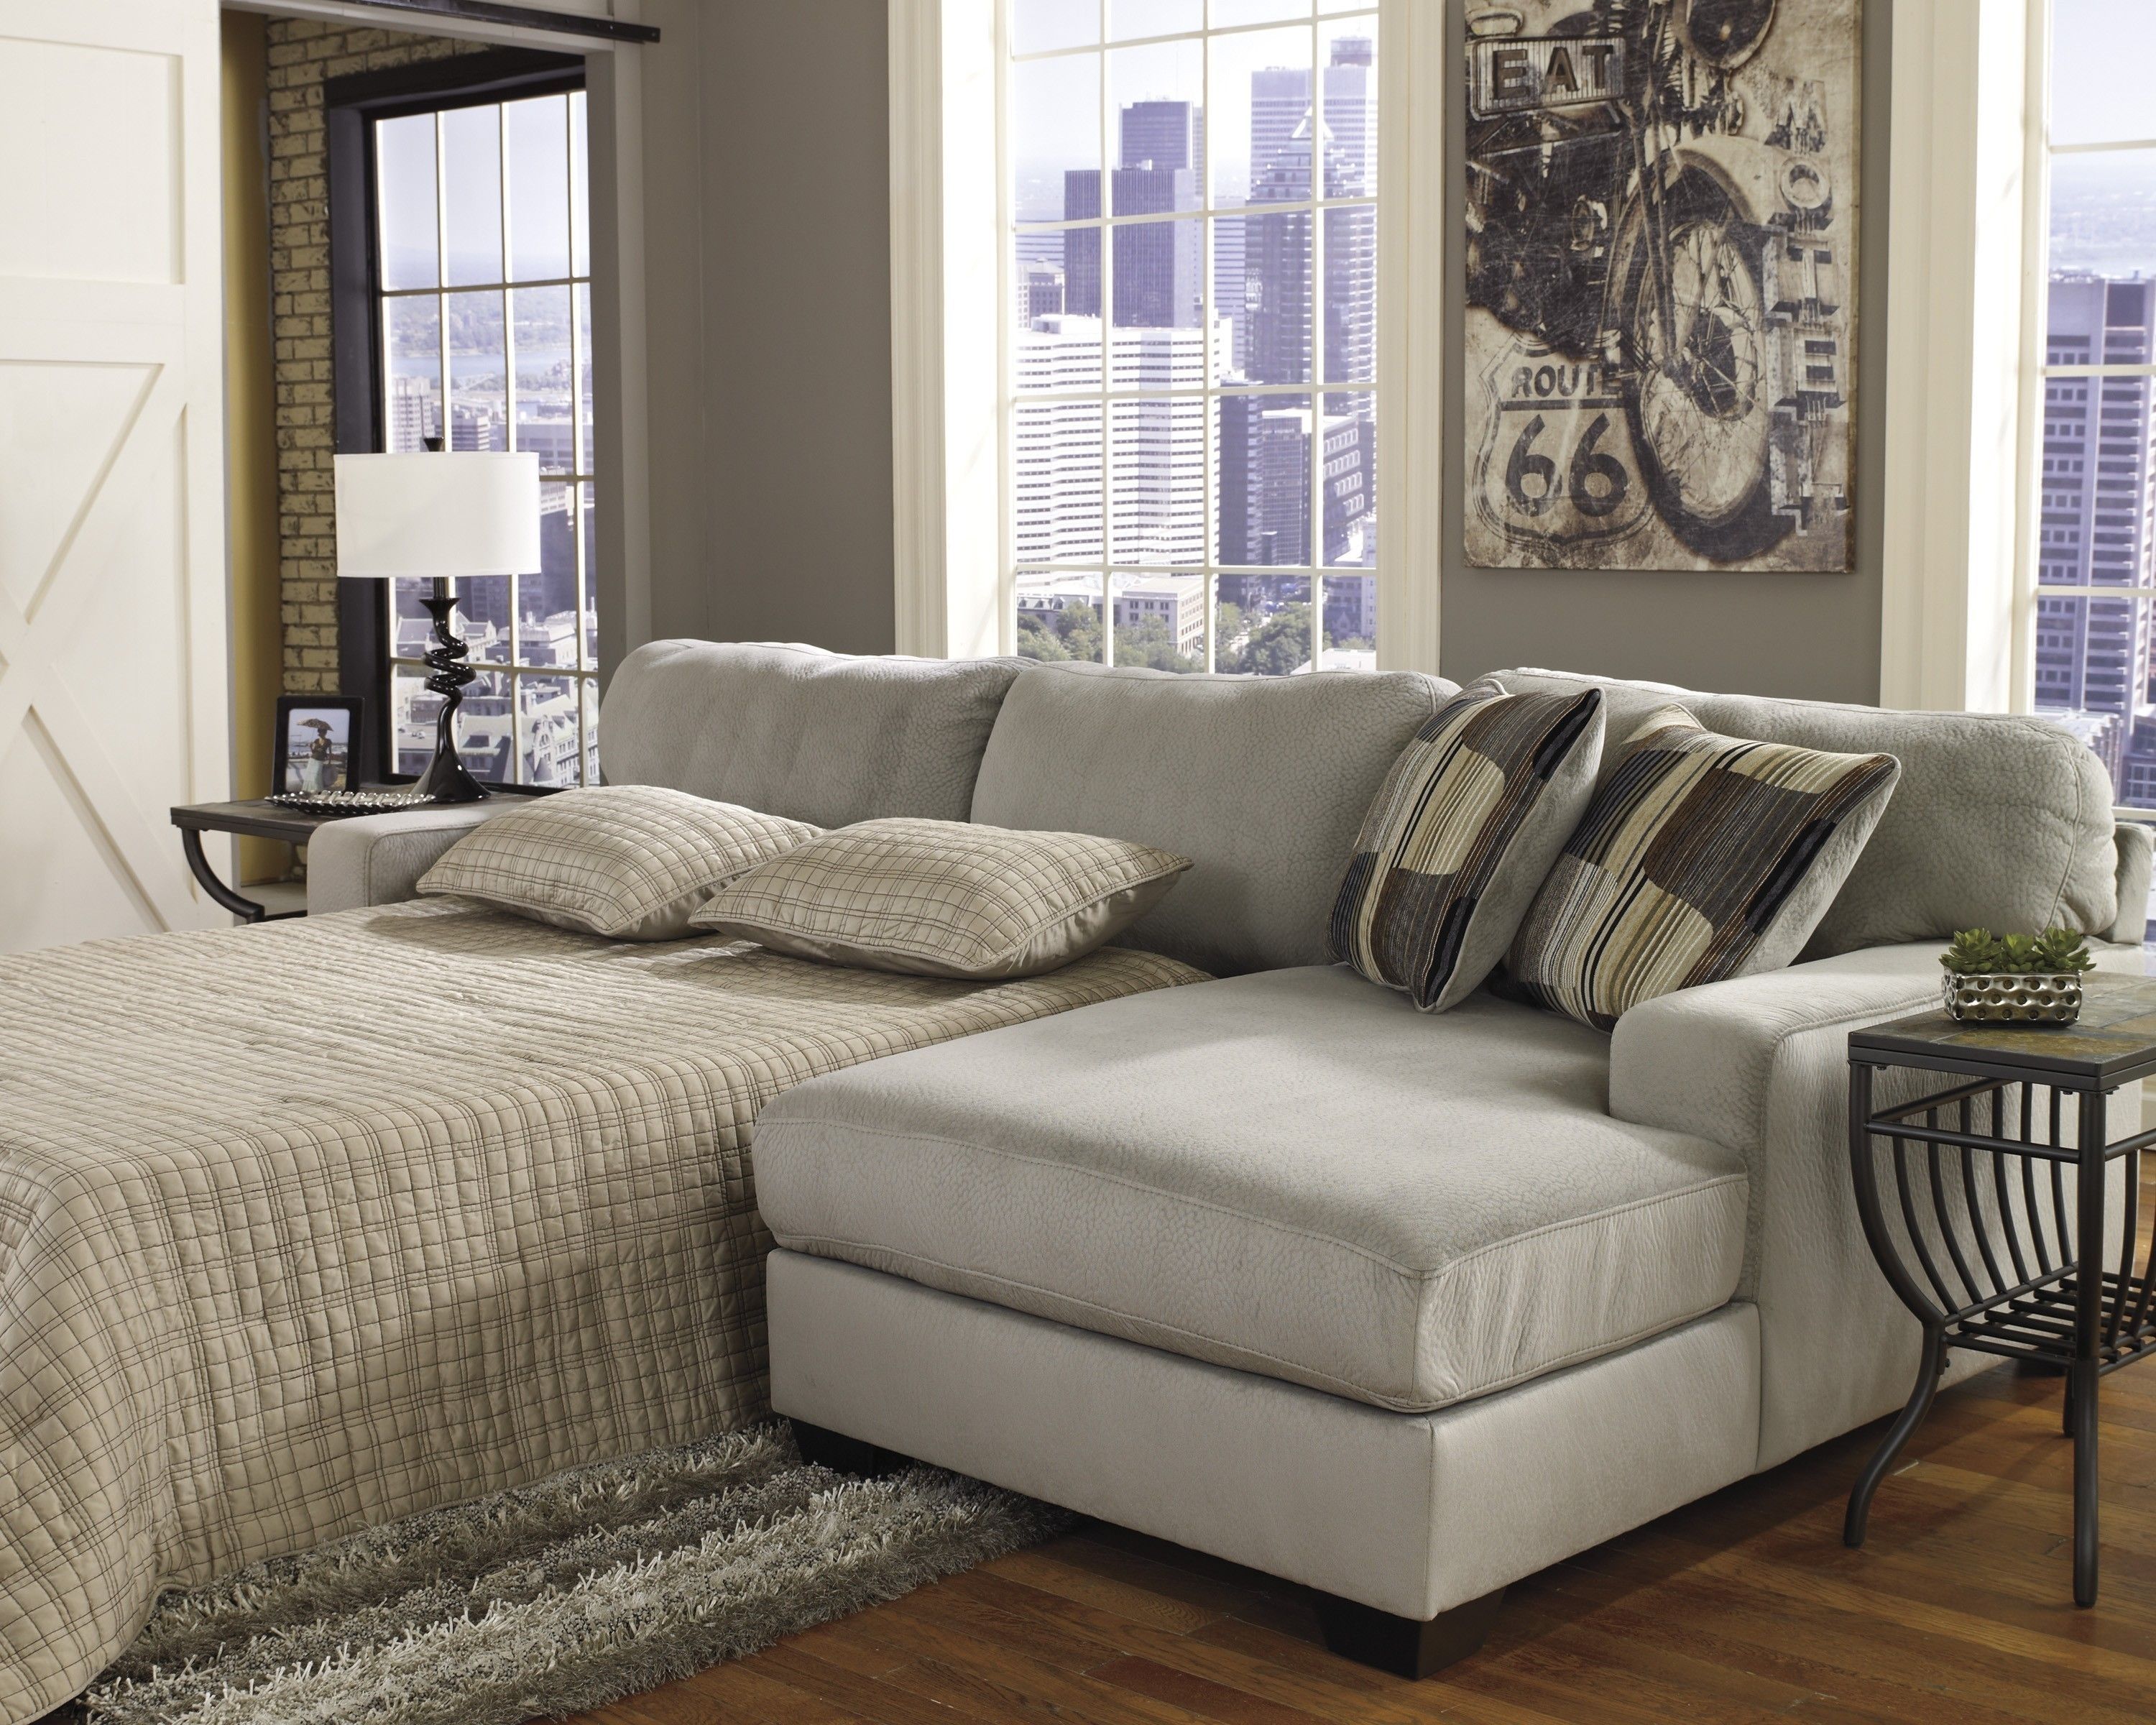 Sectional Sofa With Queen Size Sleeper | Http://tmidb Regarding Macon Ga Sectional Sofas (View 7 of 10)